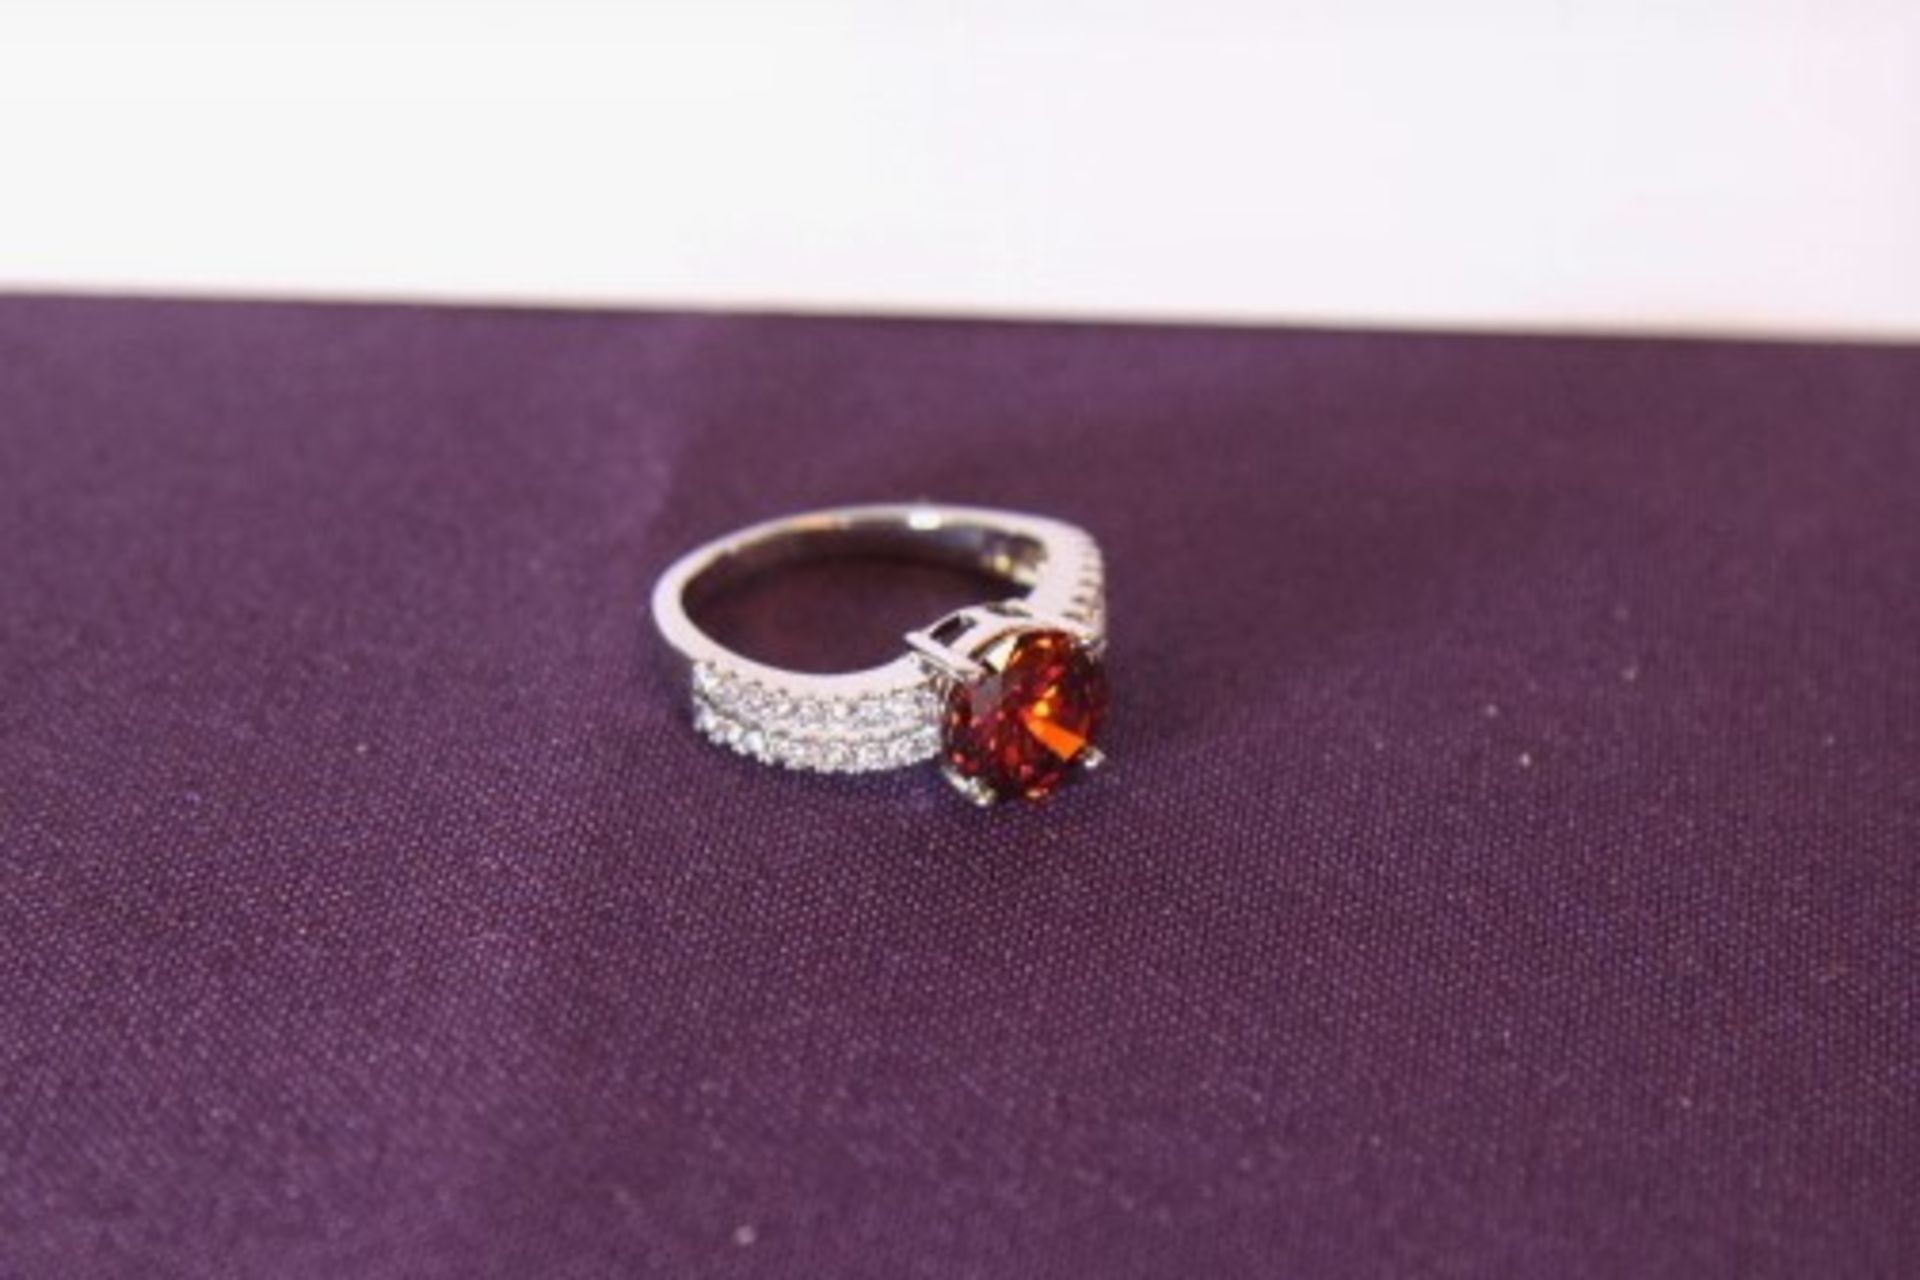 V Brand New Platinum Plated Red and White Stone Ring X 2 YOUR BID PRICE TO BE MULTIPLIED BY TWO